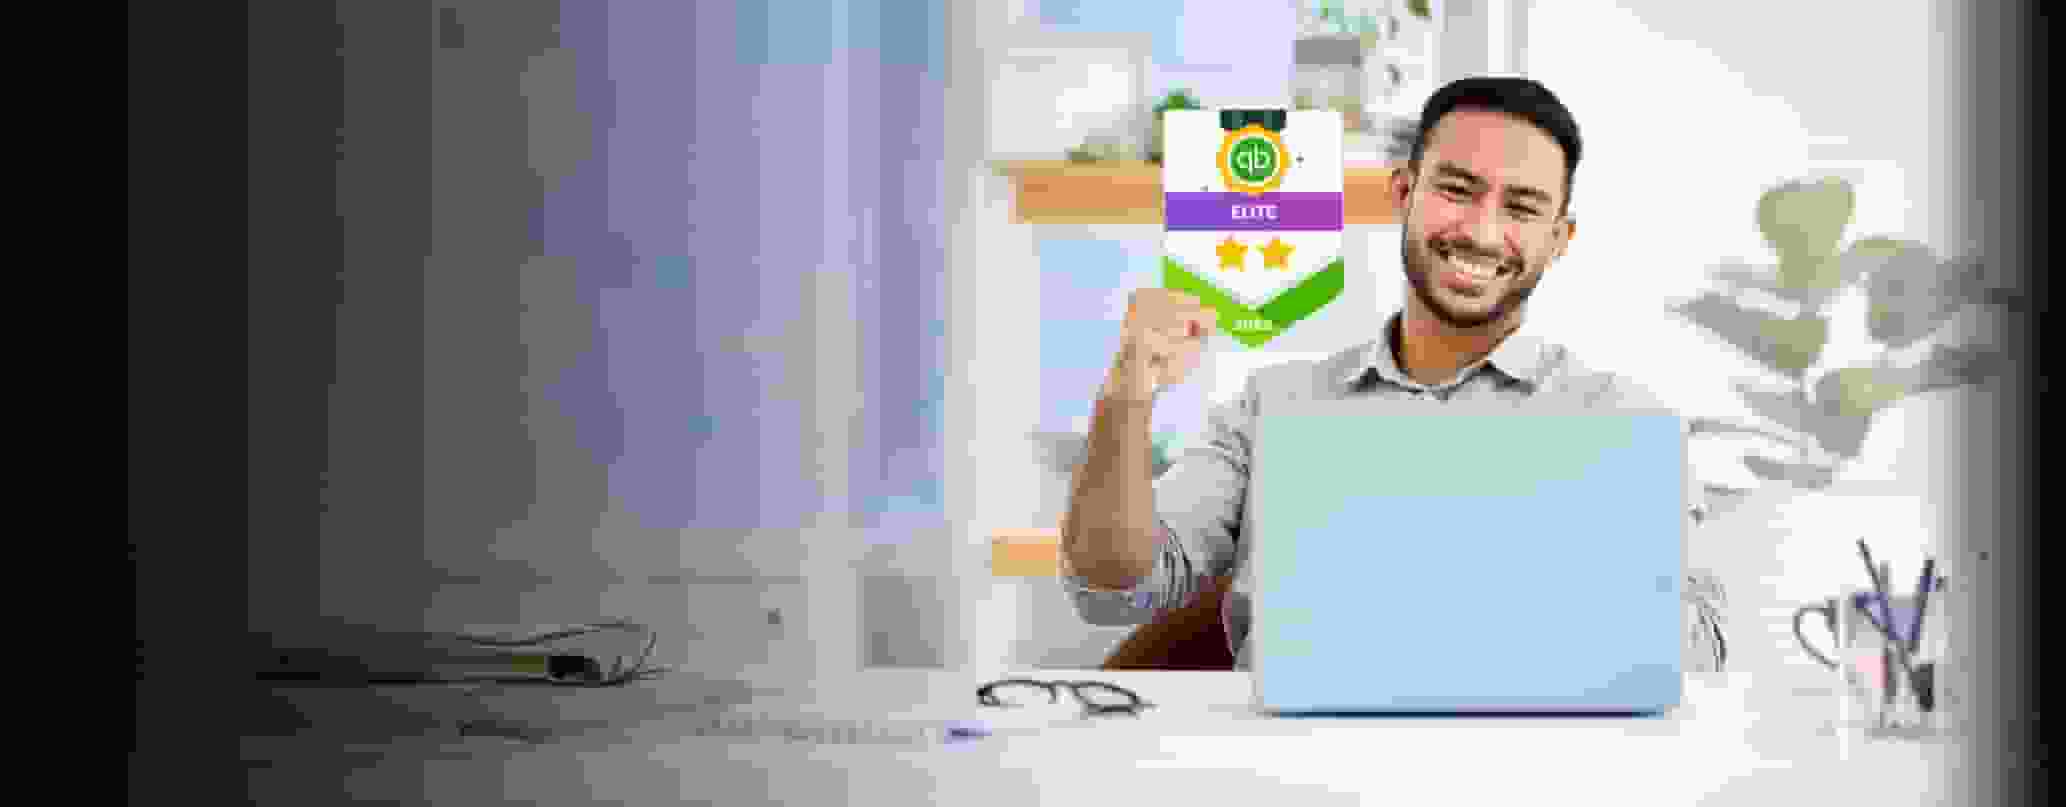 A smiling person holding a green and white laptop.